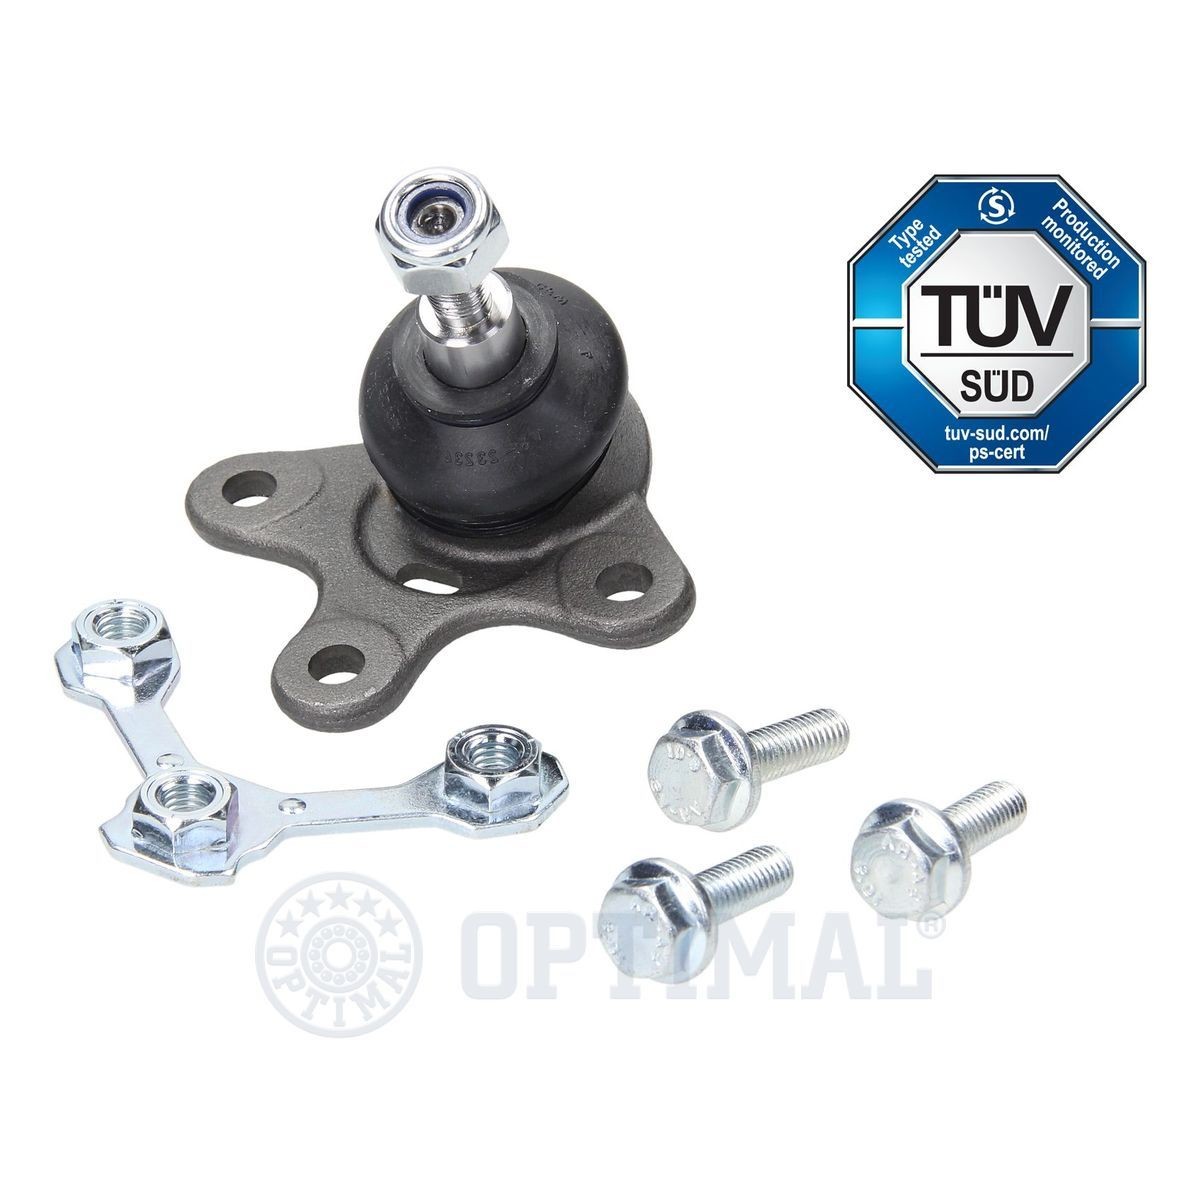 OPTIMAL with accessories, M10 x 1,00 RHT Mmm, for control arm, 1/10 Suspension ball joint G3-681 buy